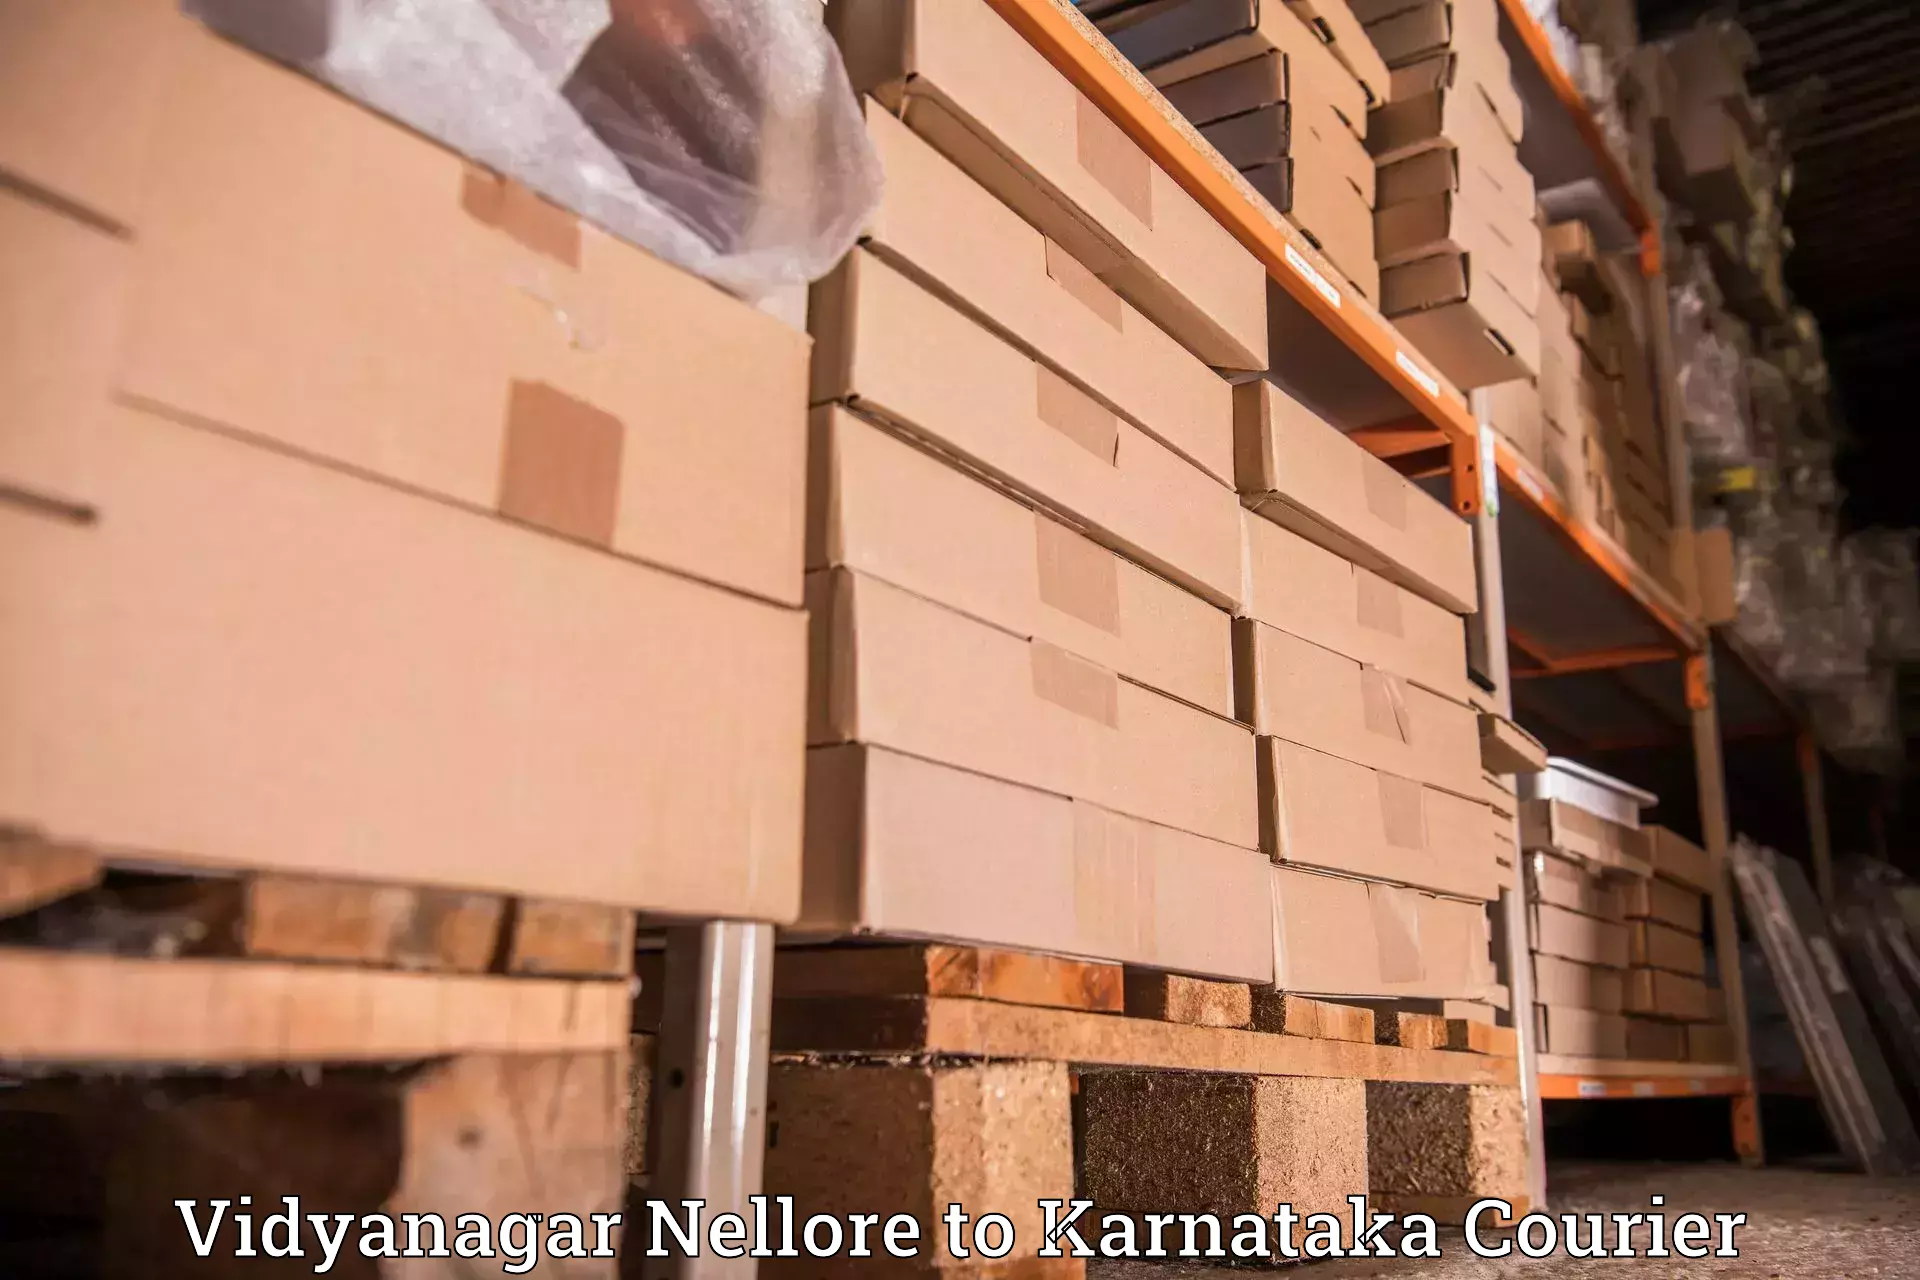 High-speed logistics services Vidyanagar Nellore to KLE Academy of Higher Education and Research Belagavi